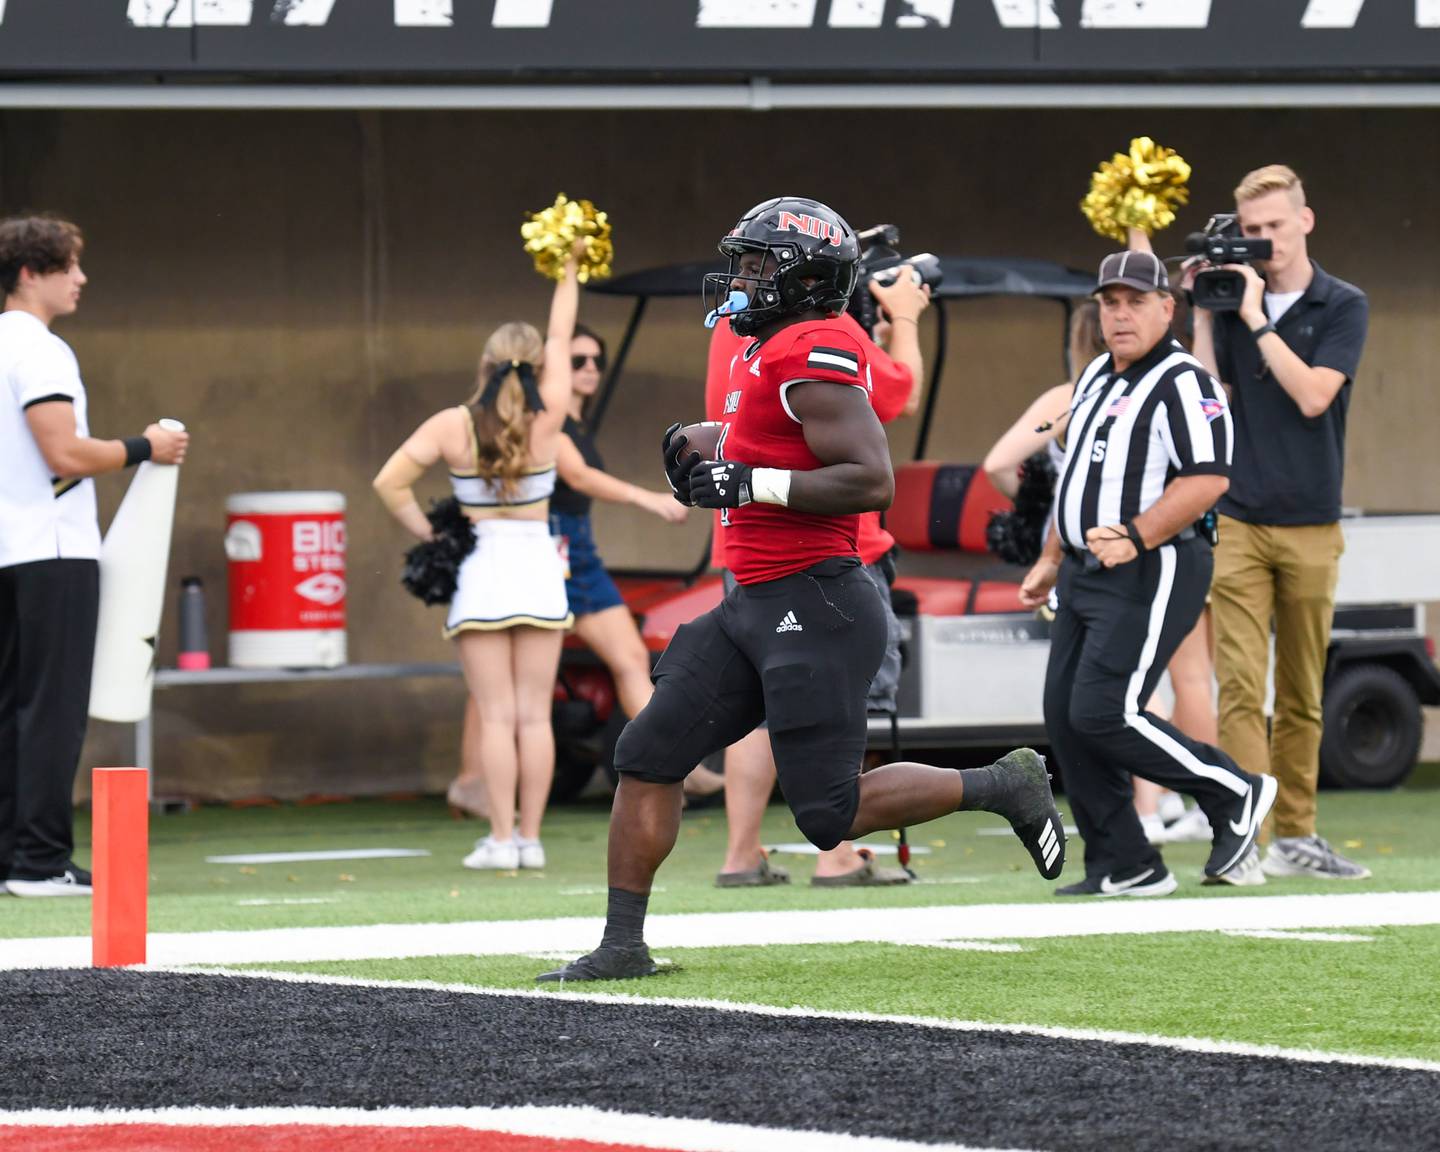 Northern Illinois Huskie Antario Brown (1) breaks away from the Vanderbilt defenders and runs into the end zone for a touchdown late in the second quarter Saturday Sep. 17th at Huskie Stadium in DeKalb.